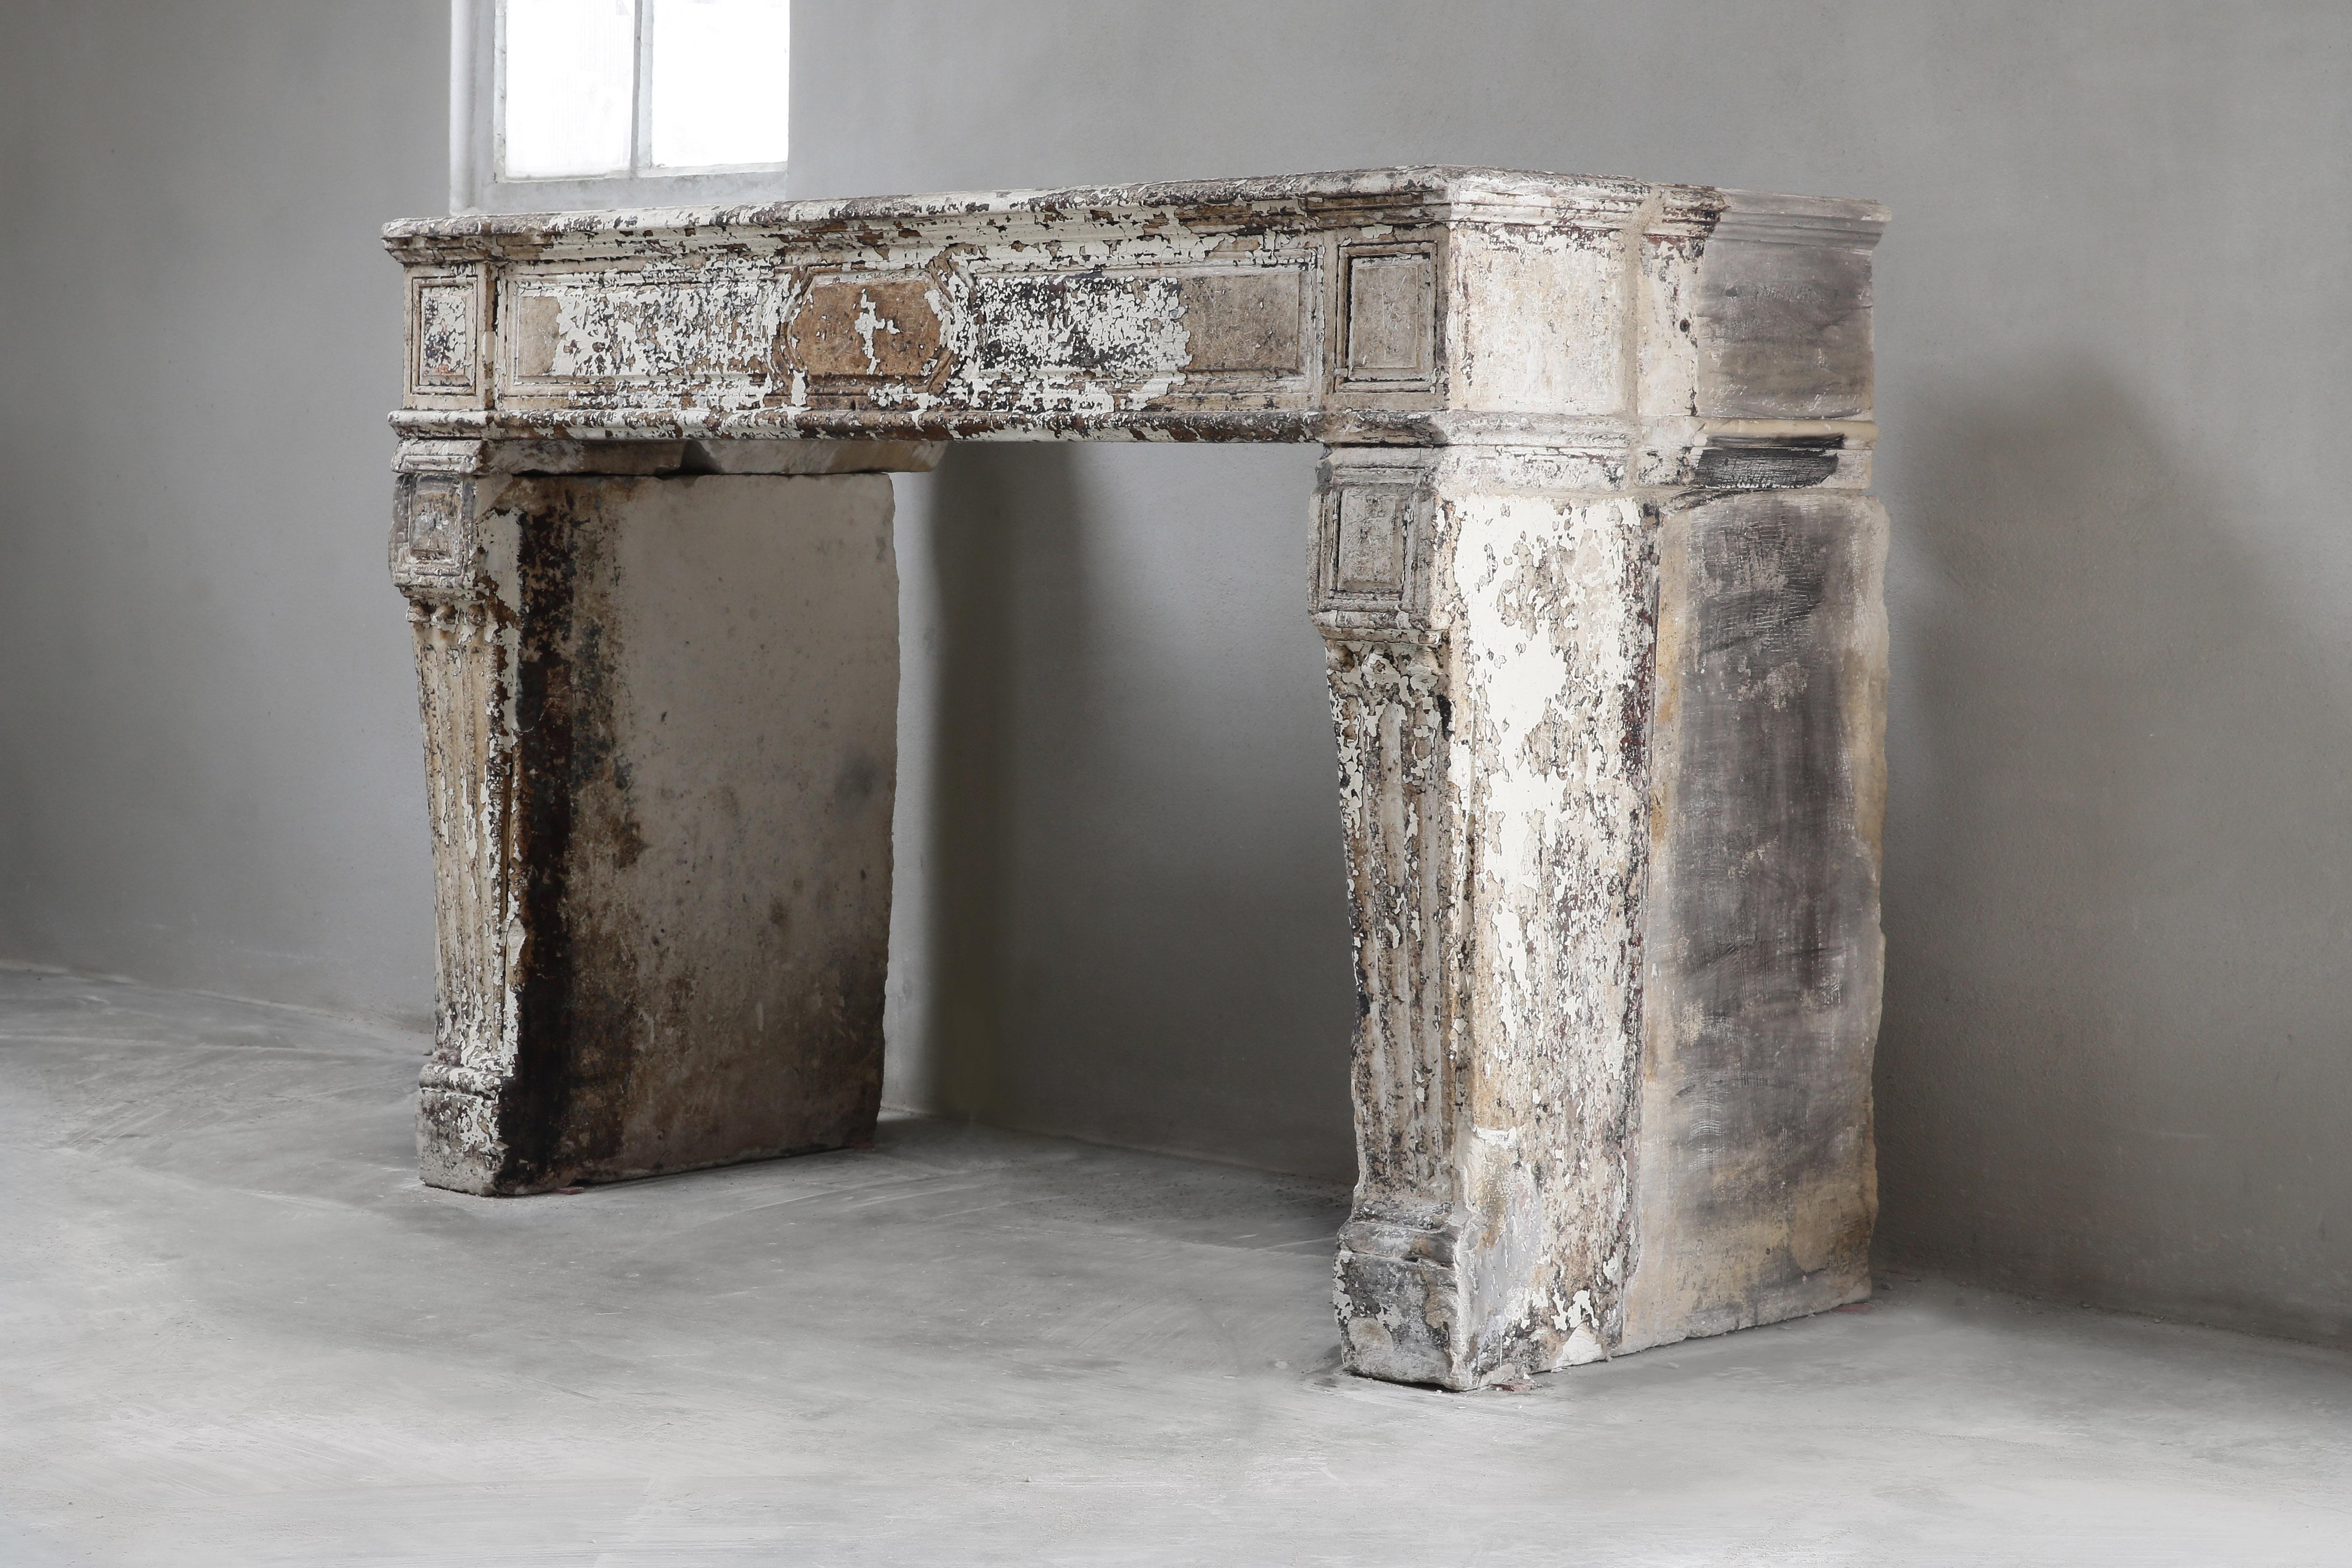 A very special antique French fireplace made of limestone. A fireplace with history! The old paint and imperfections gives this chimney an historical appearance. This antique fireplace dates back to the 19th century and is in the style of Louis XVI.